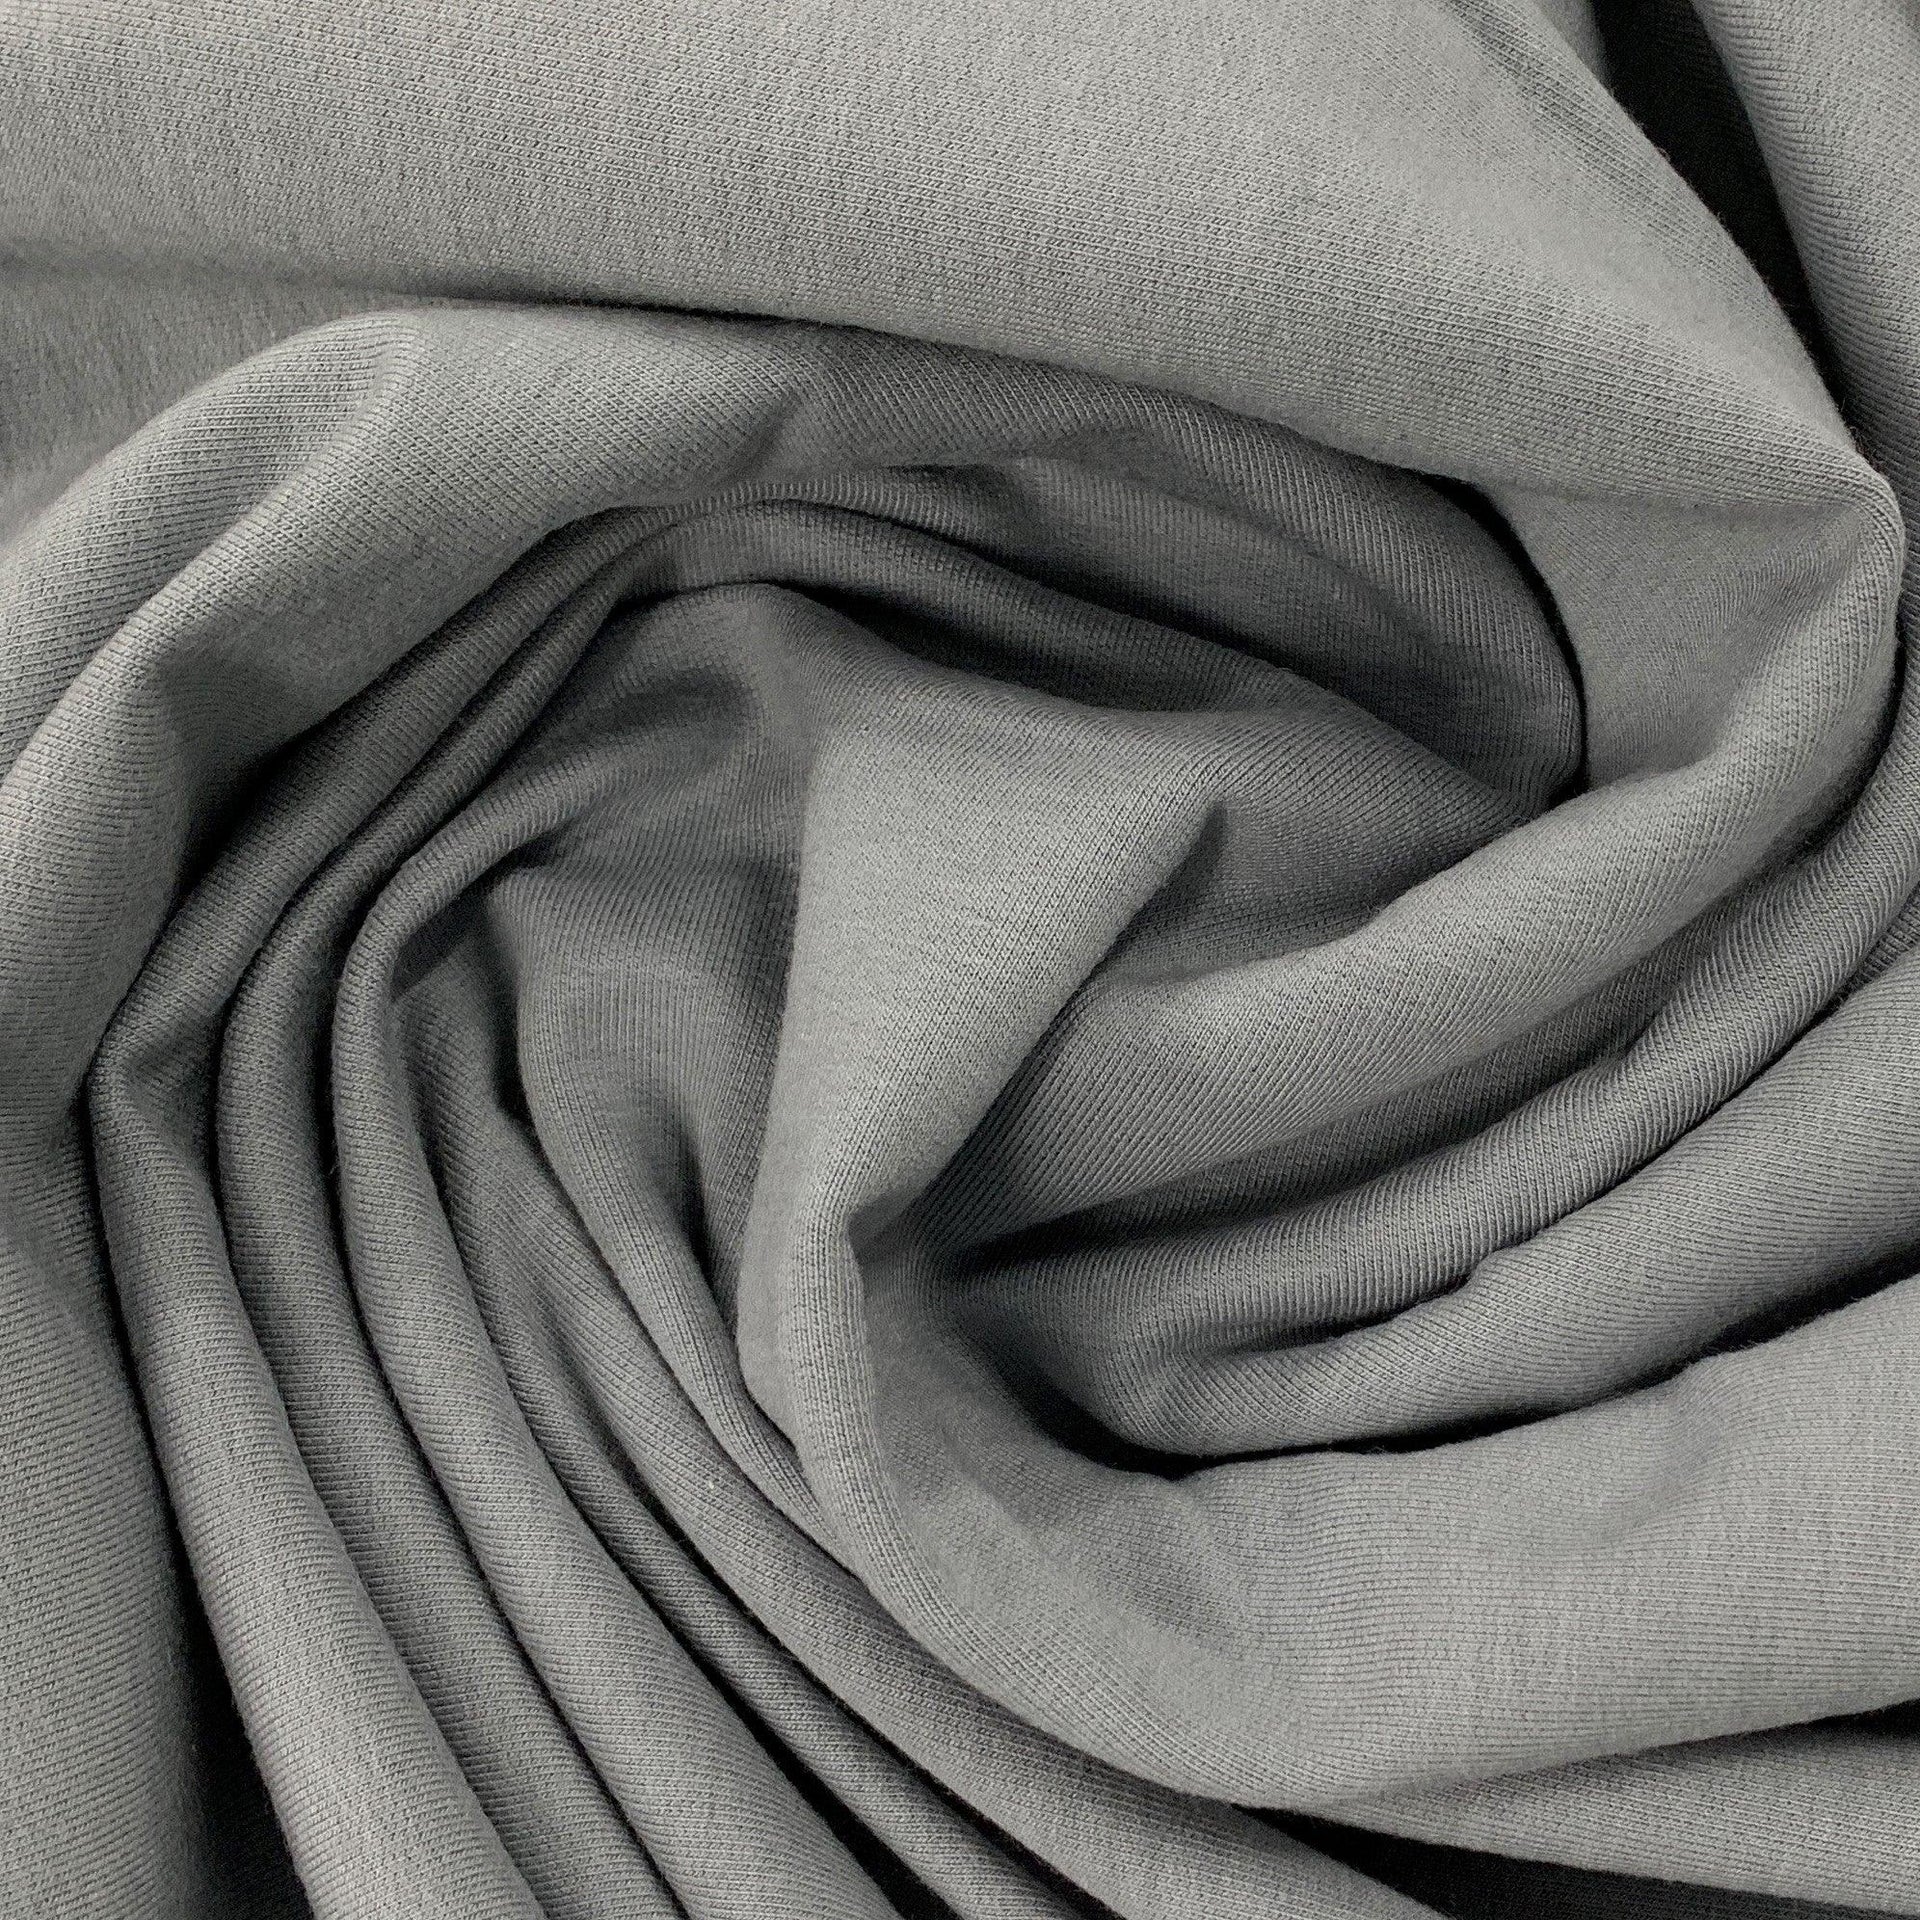 UK Stretch Fabrics - Jersey & French Terry Fabric Supplier.